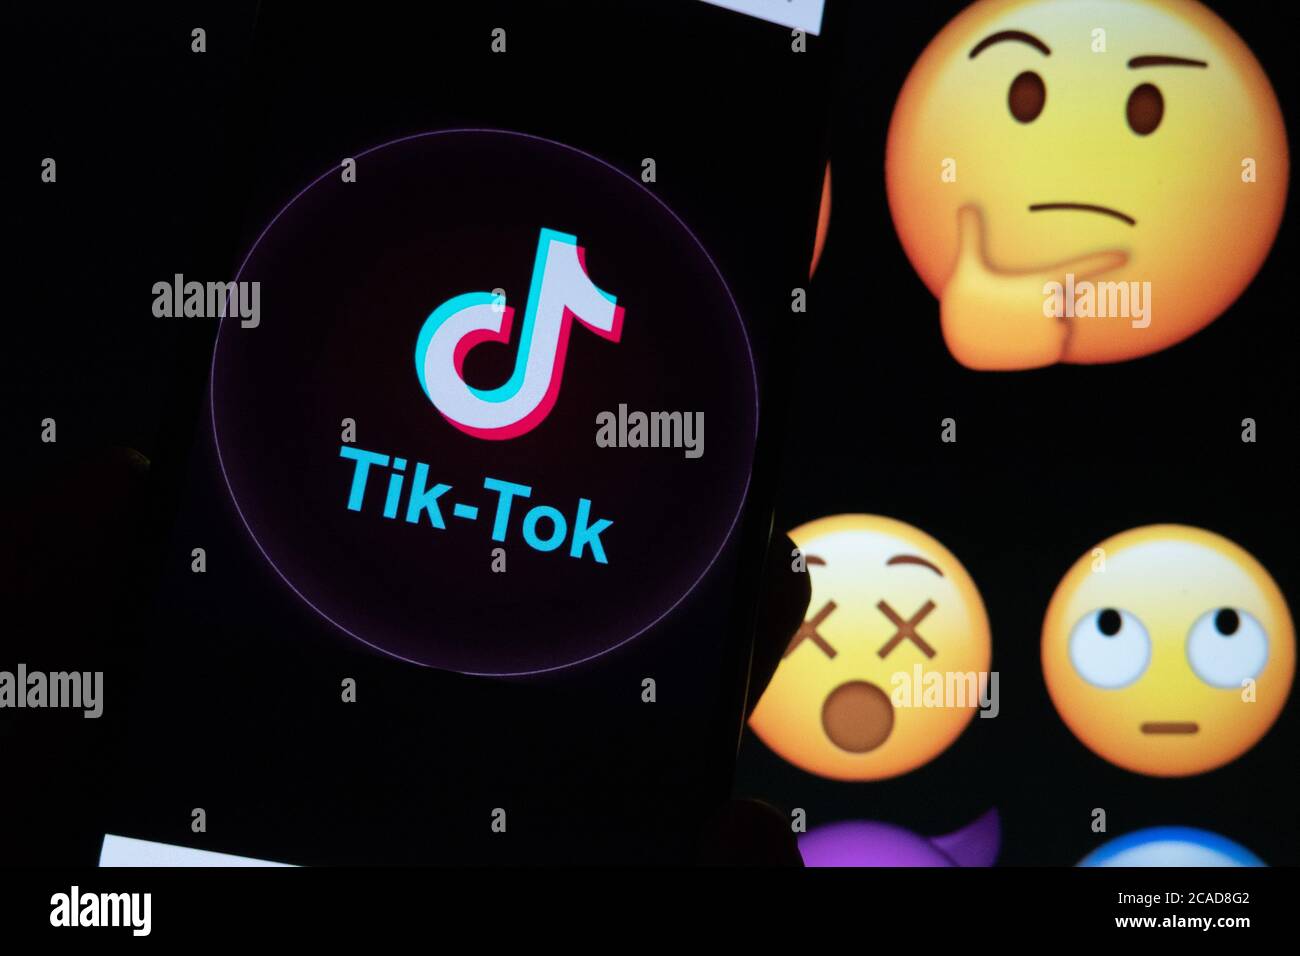 TikTok app on a phone screen. TikTok is a Chinese video-sharing social networking service owned by ByteDance. Stock Photo